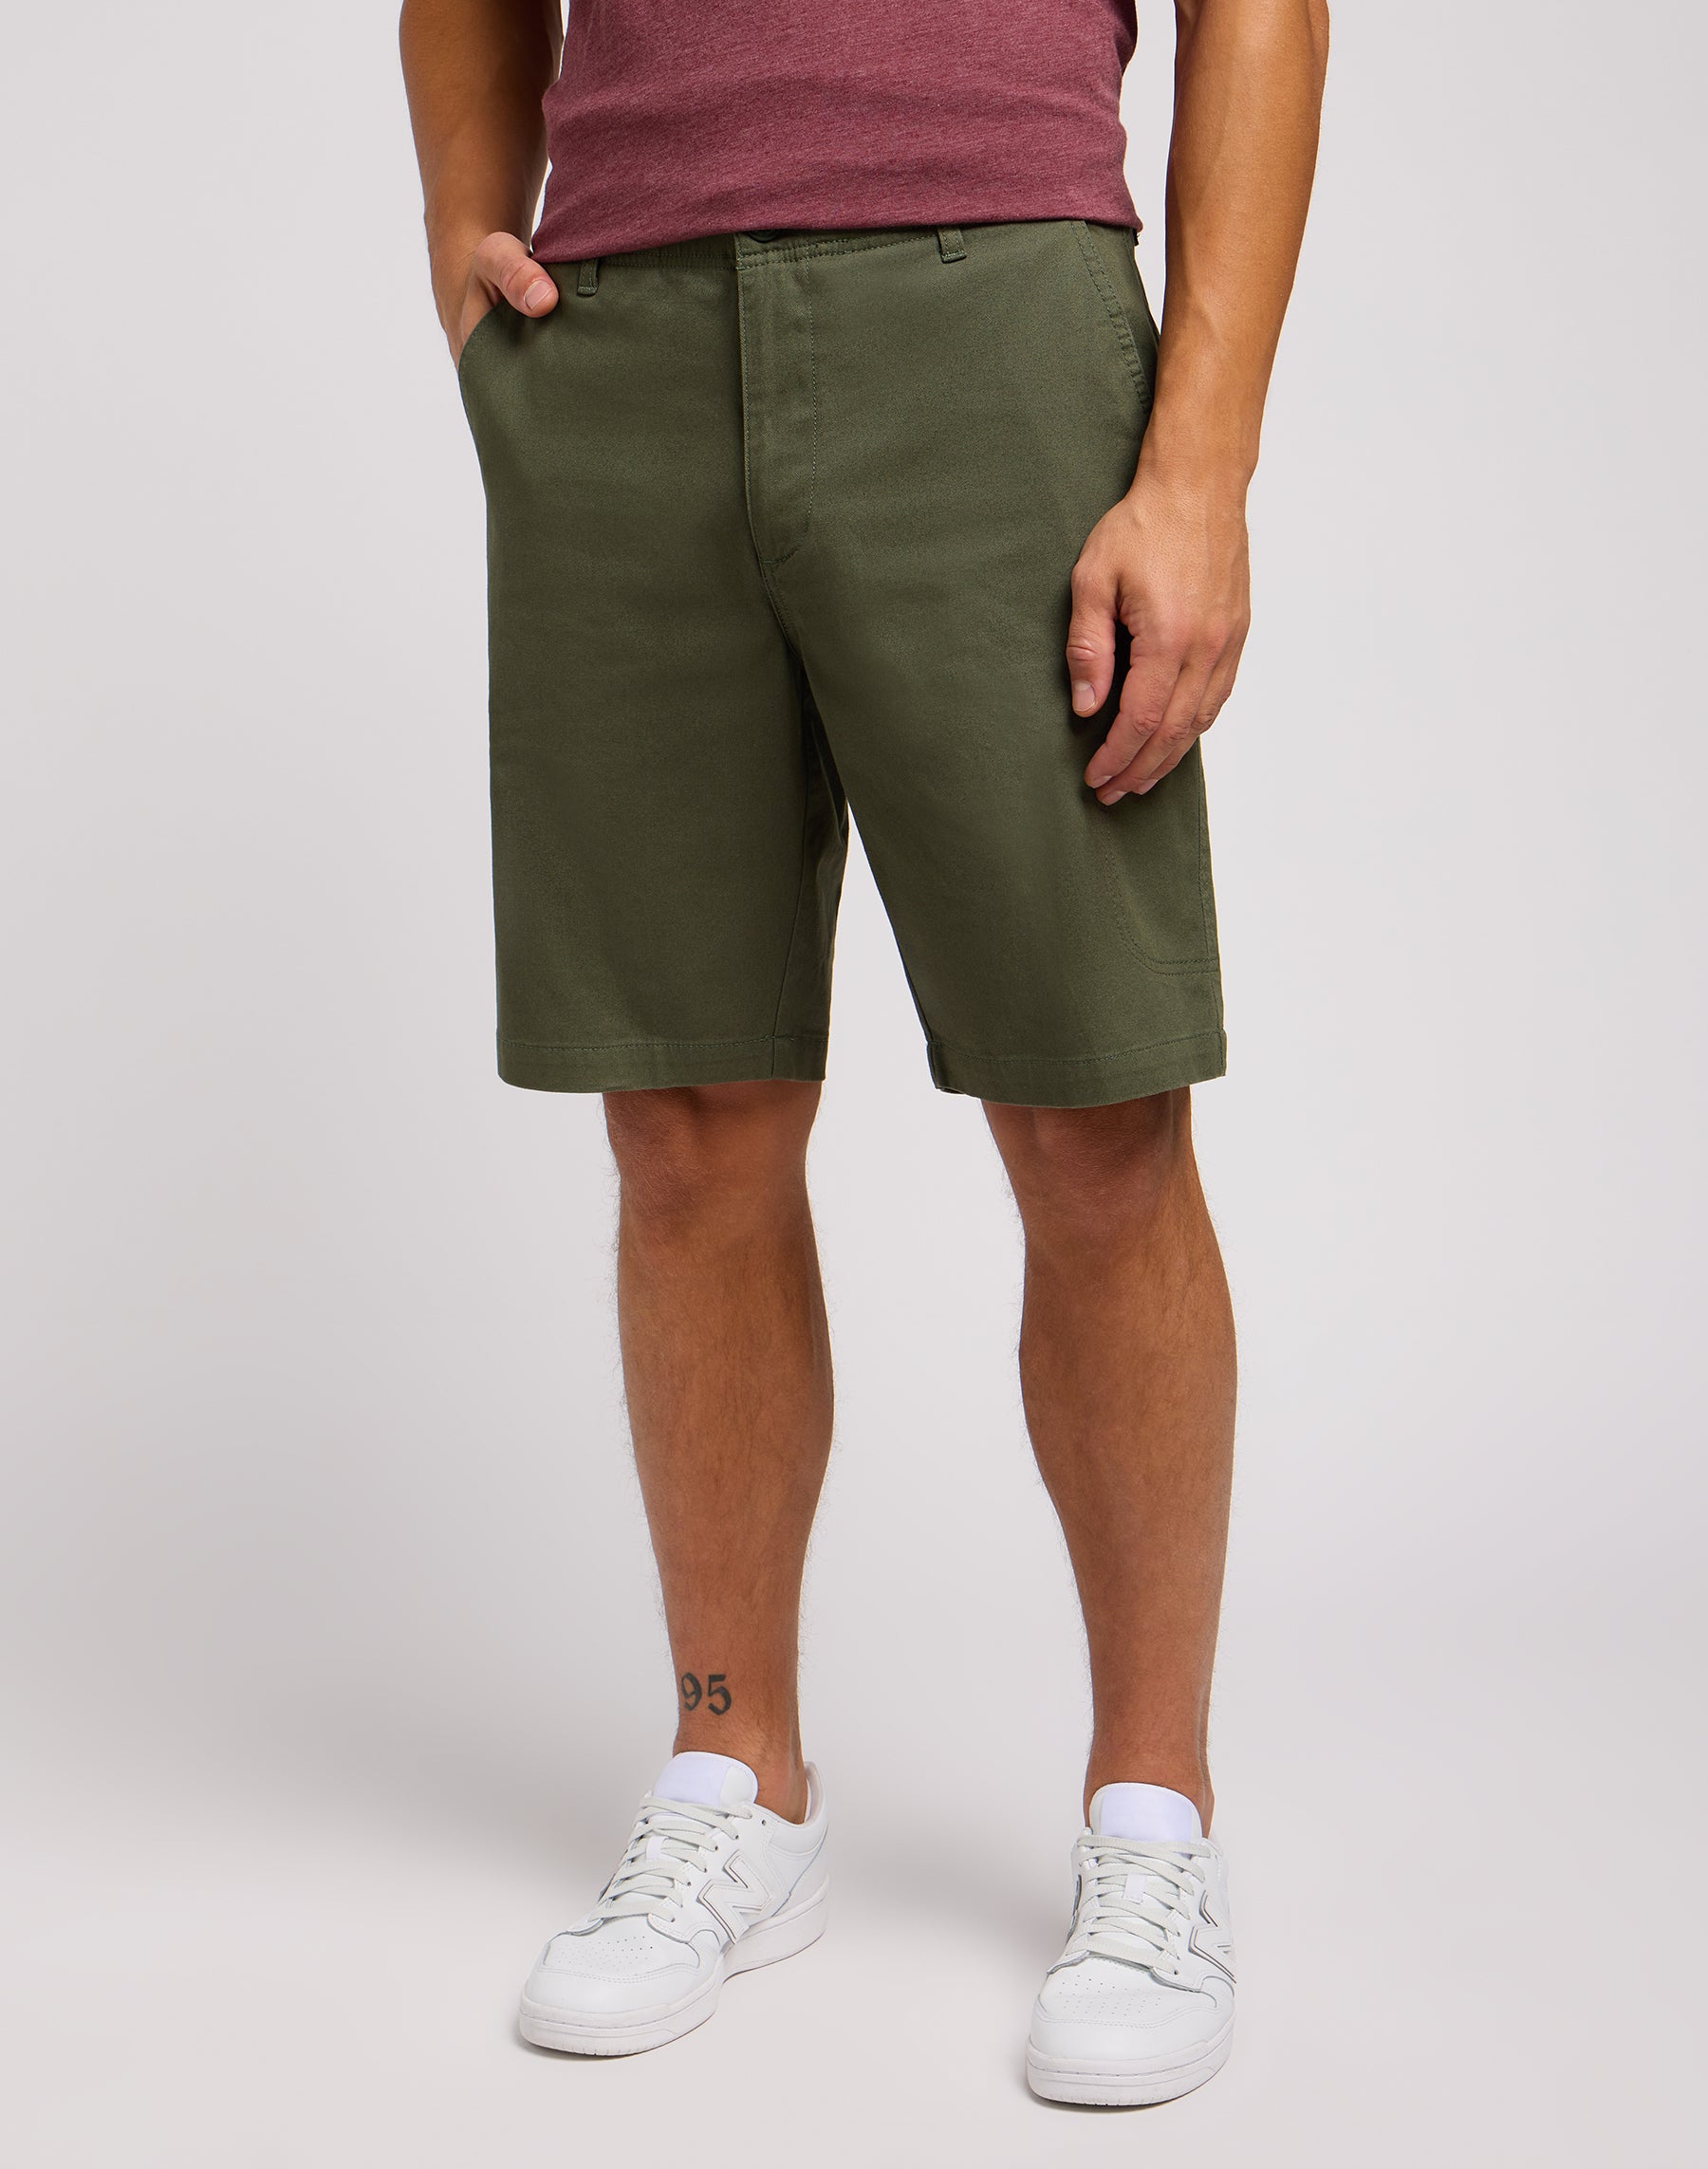 XC Weltpocket Short in Olive Grove Shorts Lee   